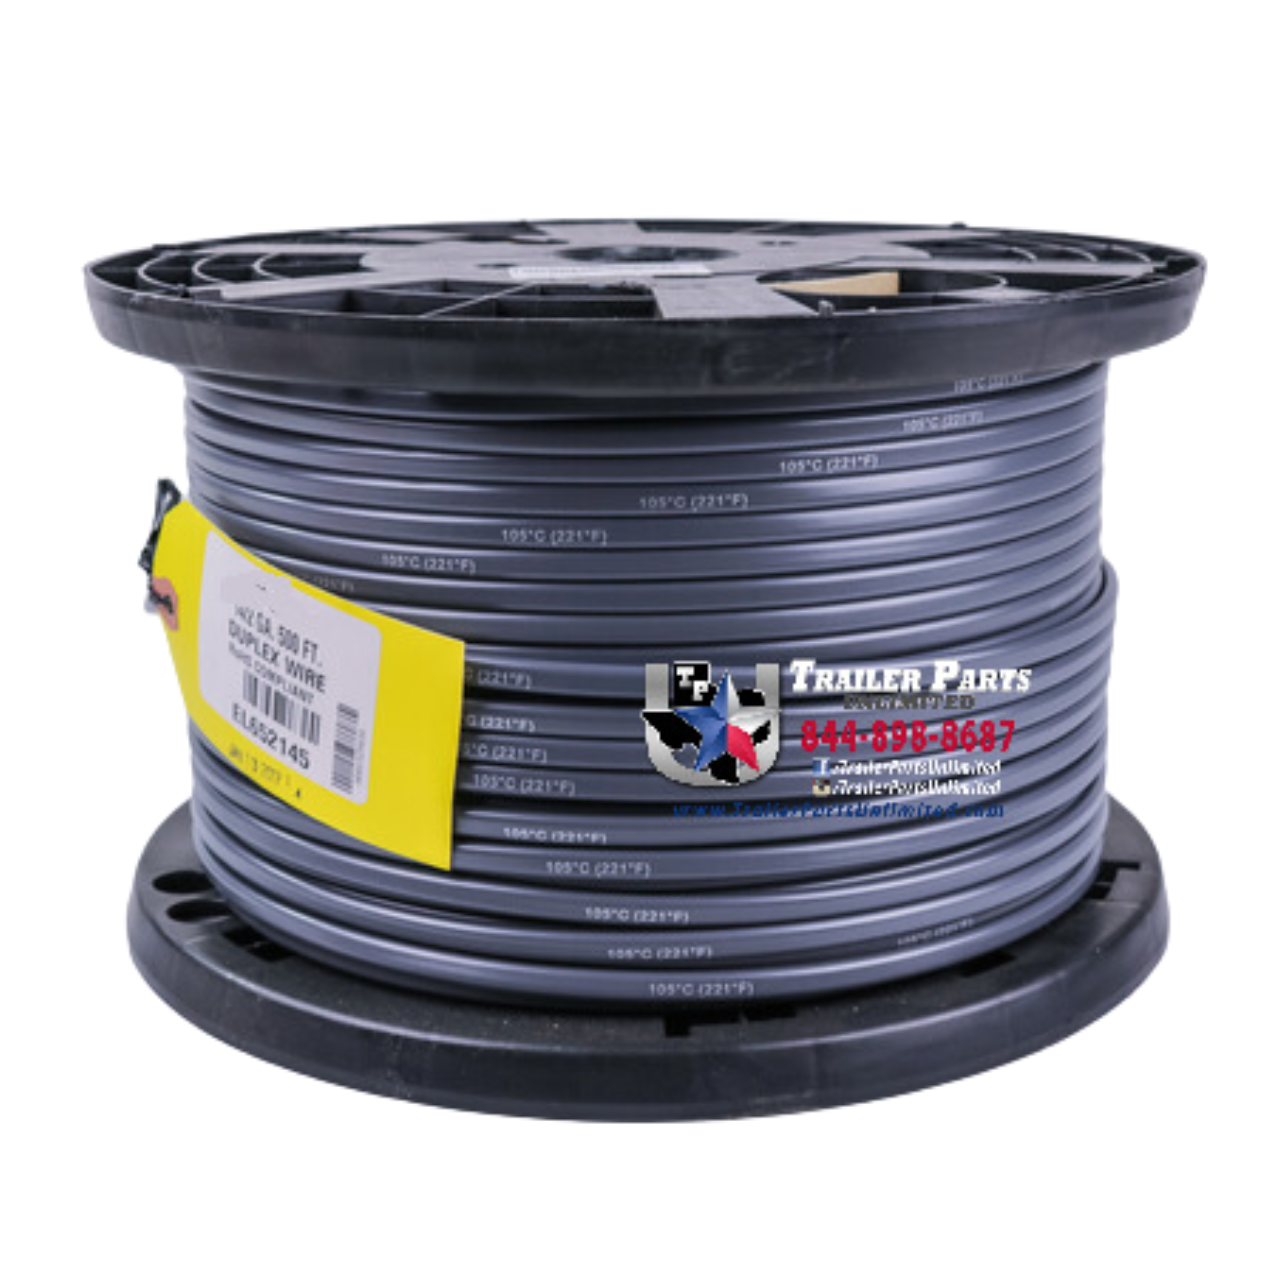 2-Way Wire 14 Gauge 2-Conductor Trailer Cable